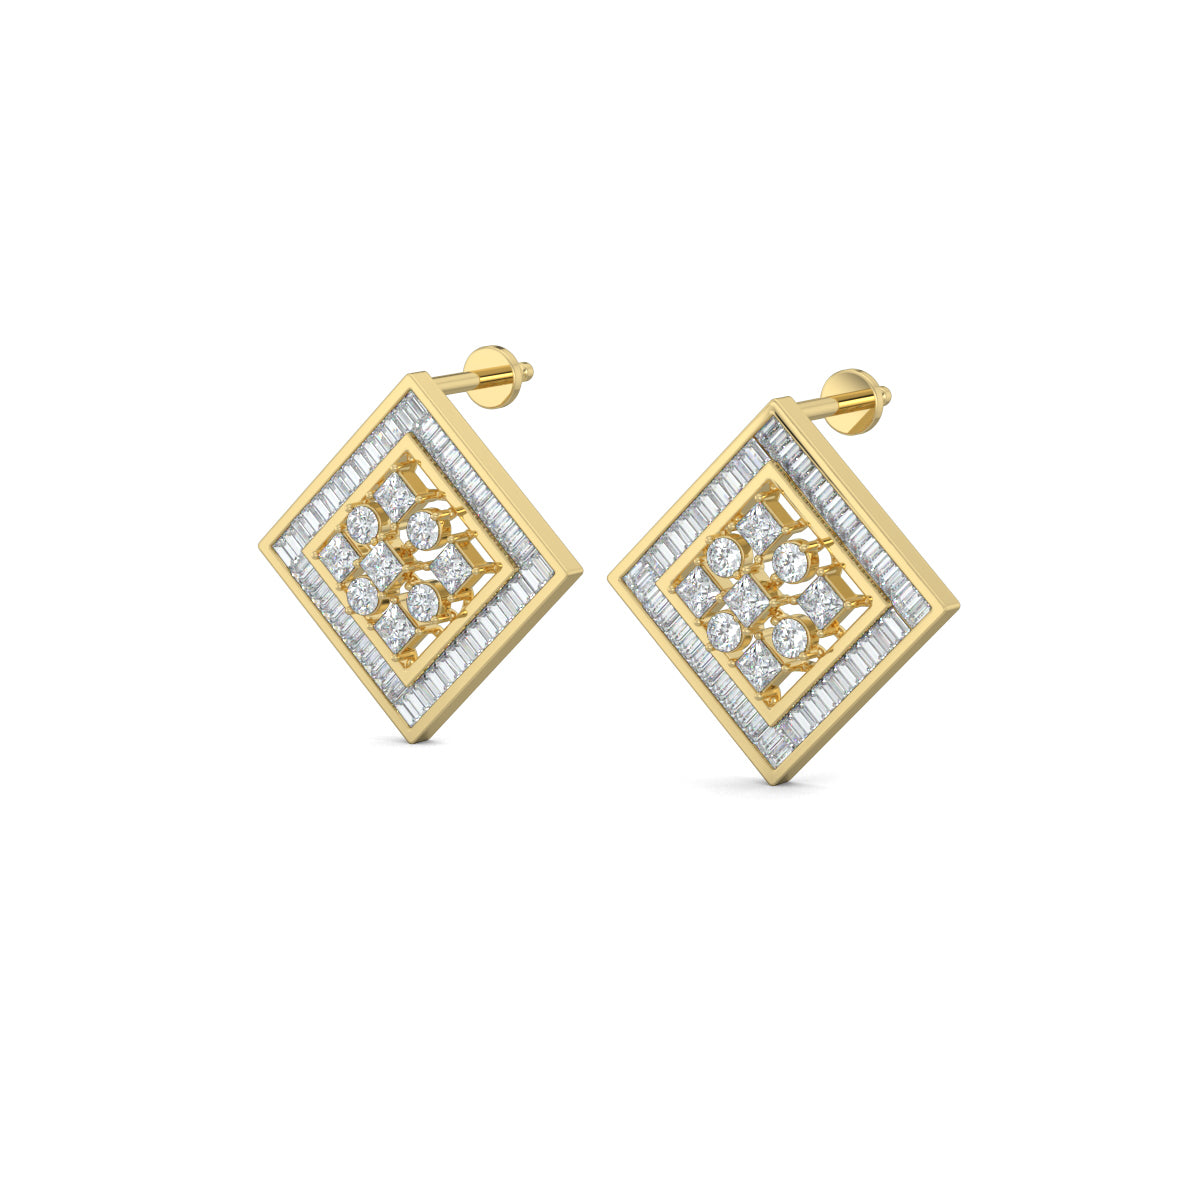 Yellow Gold, Diamond Earrings, Natural diamond stud earrings, Lab-grown diamond stud earrings, petite square shape, baguette channeling, round and princess-cut diamonds, elegant jewelry.